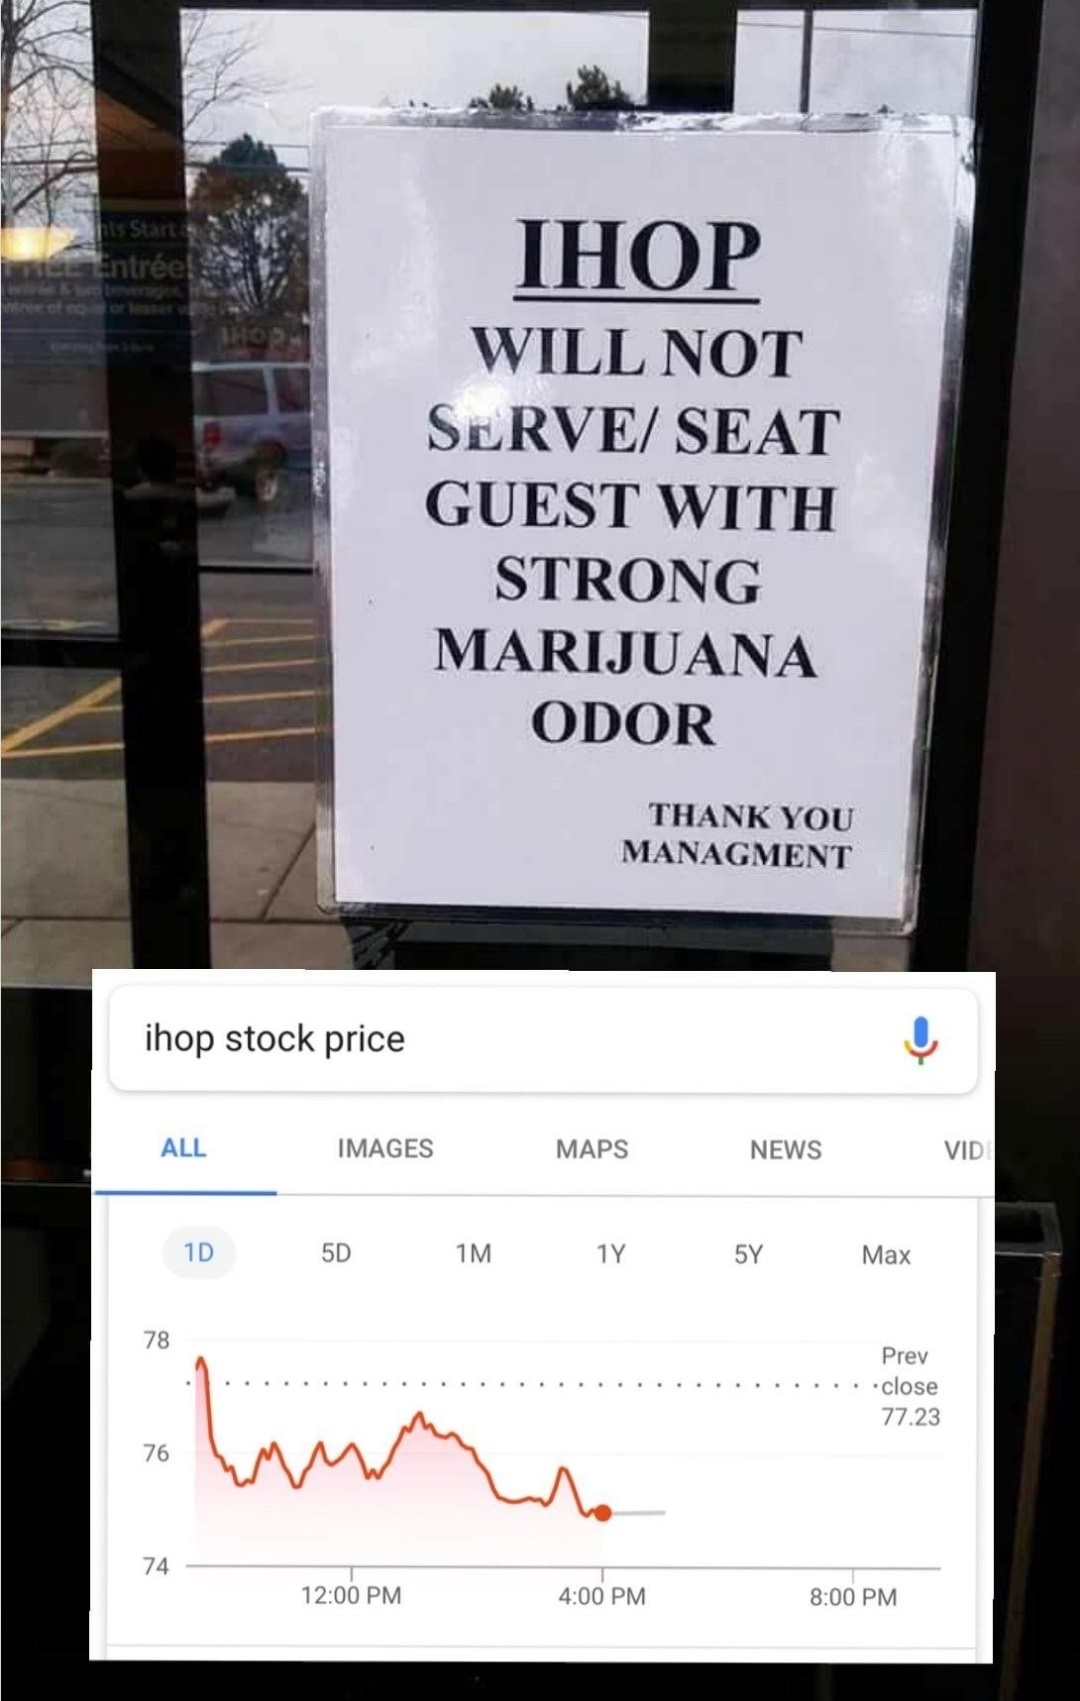 ihop meme - Start itrees Ihop Will Not Serve Seat Guest With Strong Marijuana Odor Thank You Managment ihop stock price All Images Images Maps Maps News News Vid Vidi 1D 5D 1M 1Y 5 Y Max Prev ........close 77.23